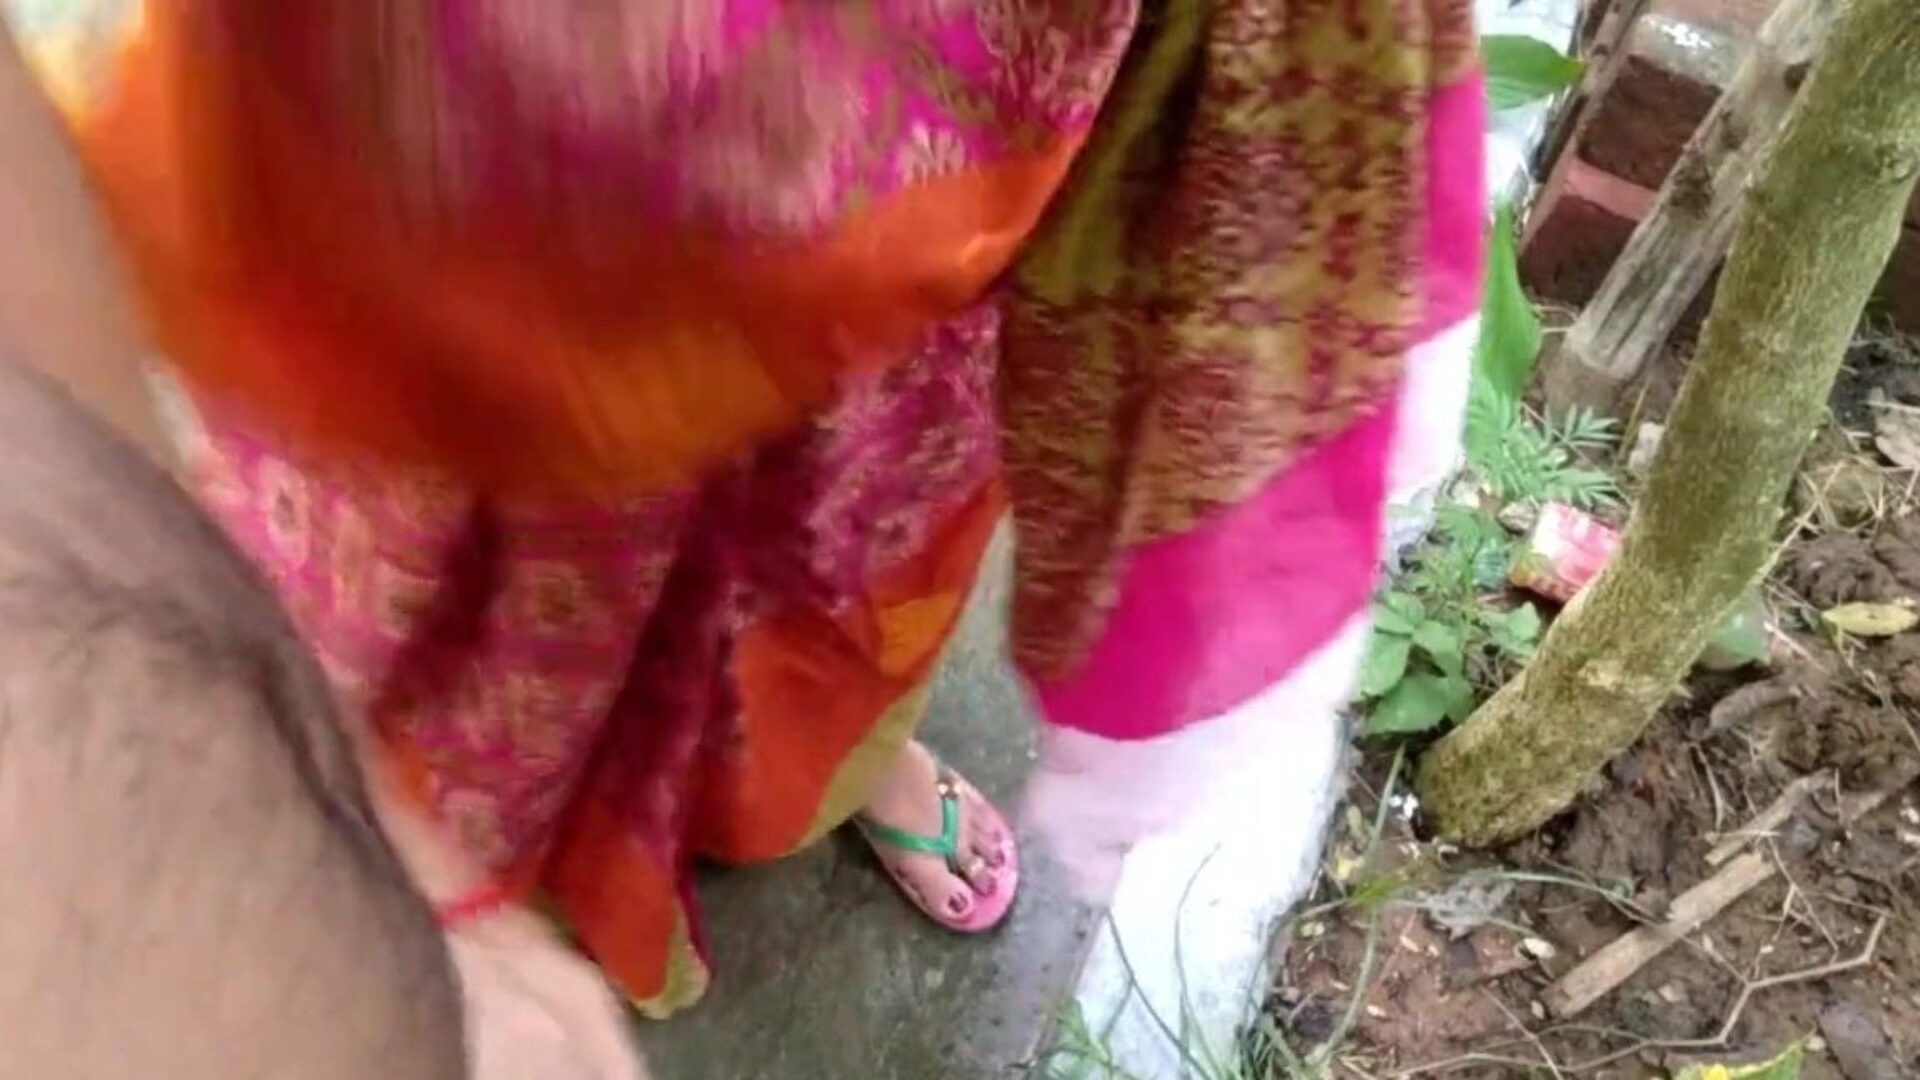 everbest outdoor sex with stranger bhabhi: free hd porno 75 watch everbest outdoor sex with stranger bhabhi film scene on xhamster - the ultimate database of free asian indian hd gonzo porno tube videos